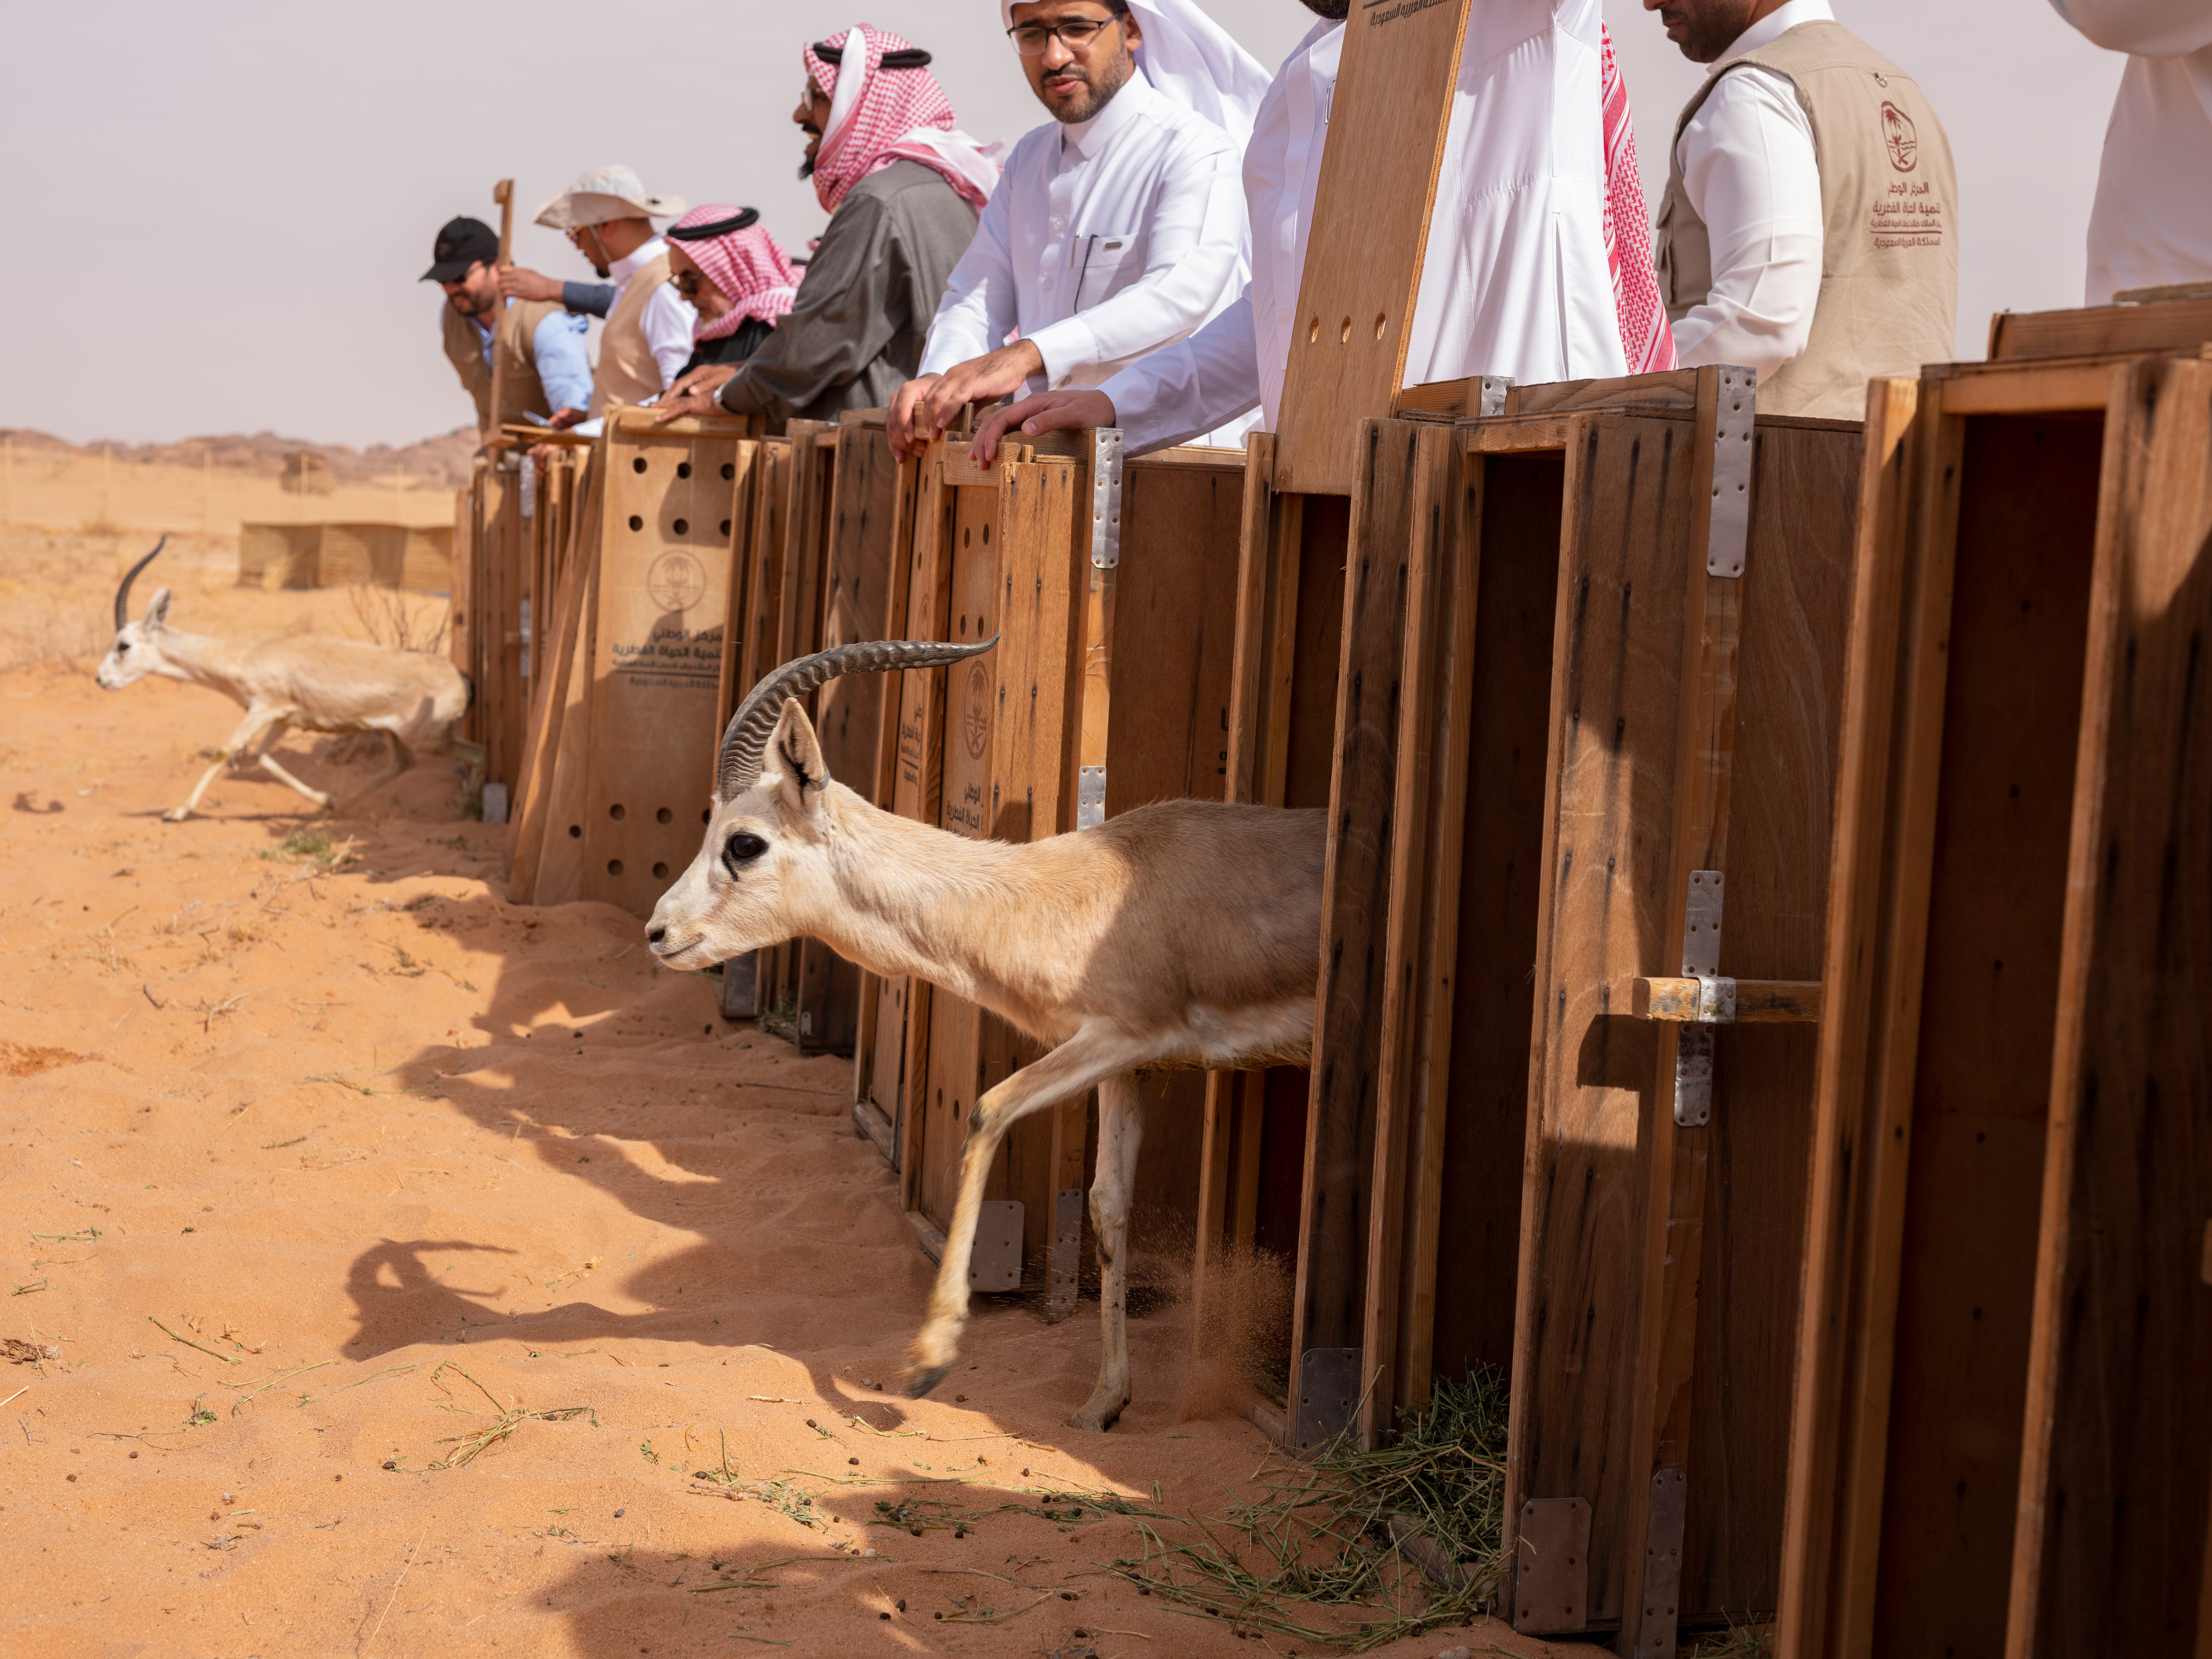 Wildlife is released at a nature reserve in Saudi Arabia